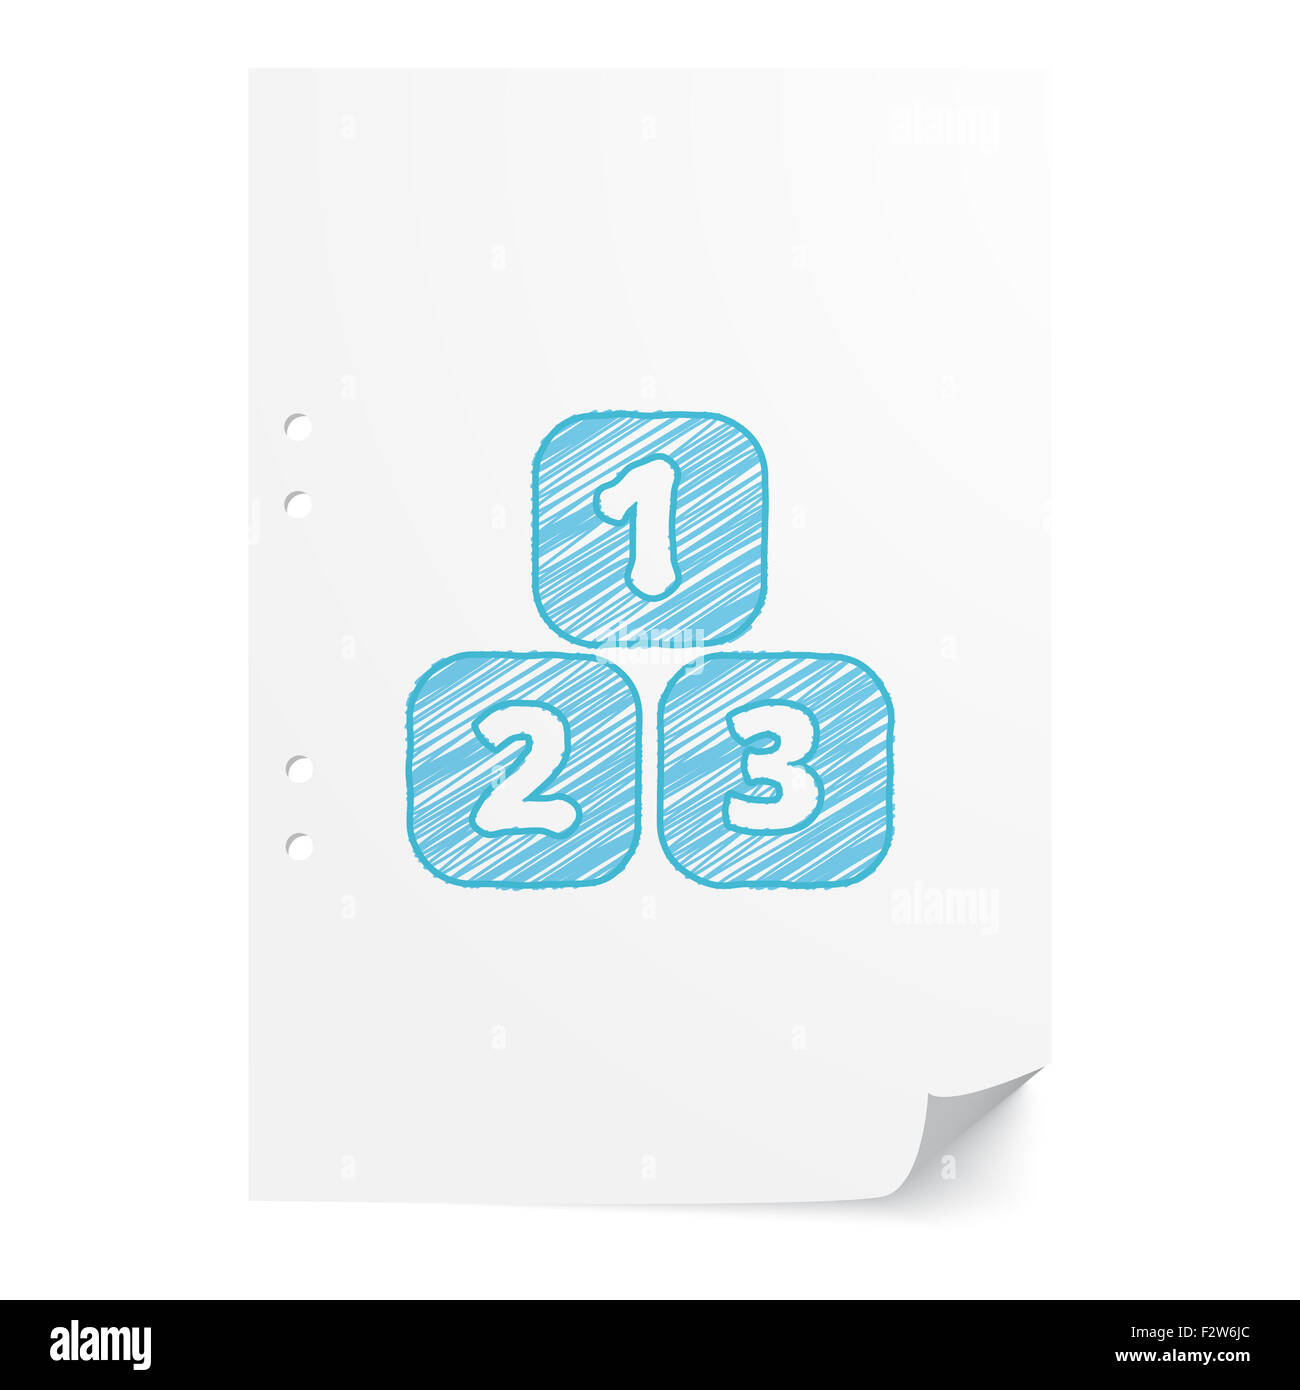 Blue handdrawn 123 Blocks illustration on white paper sheet with copy space Stock Photo